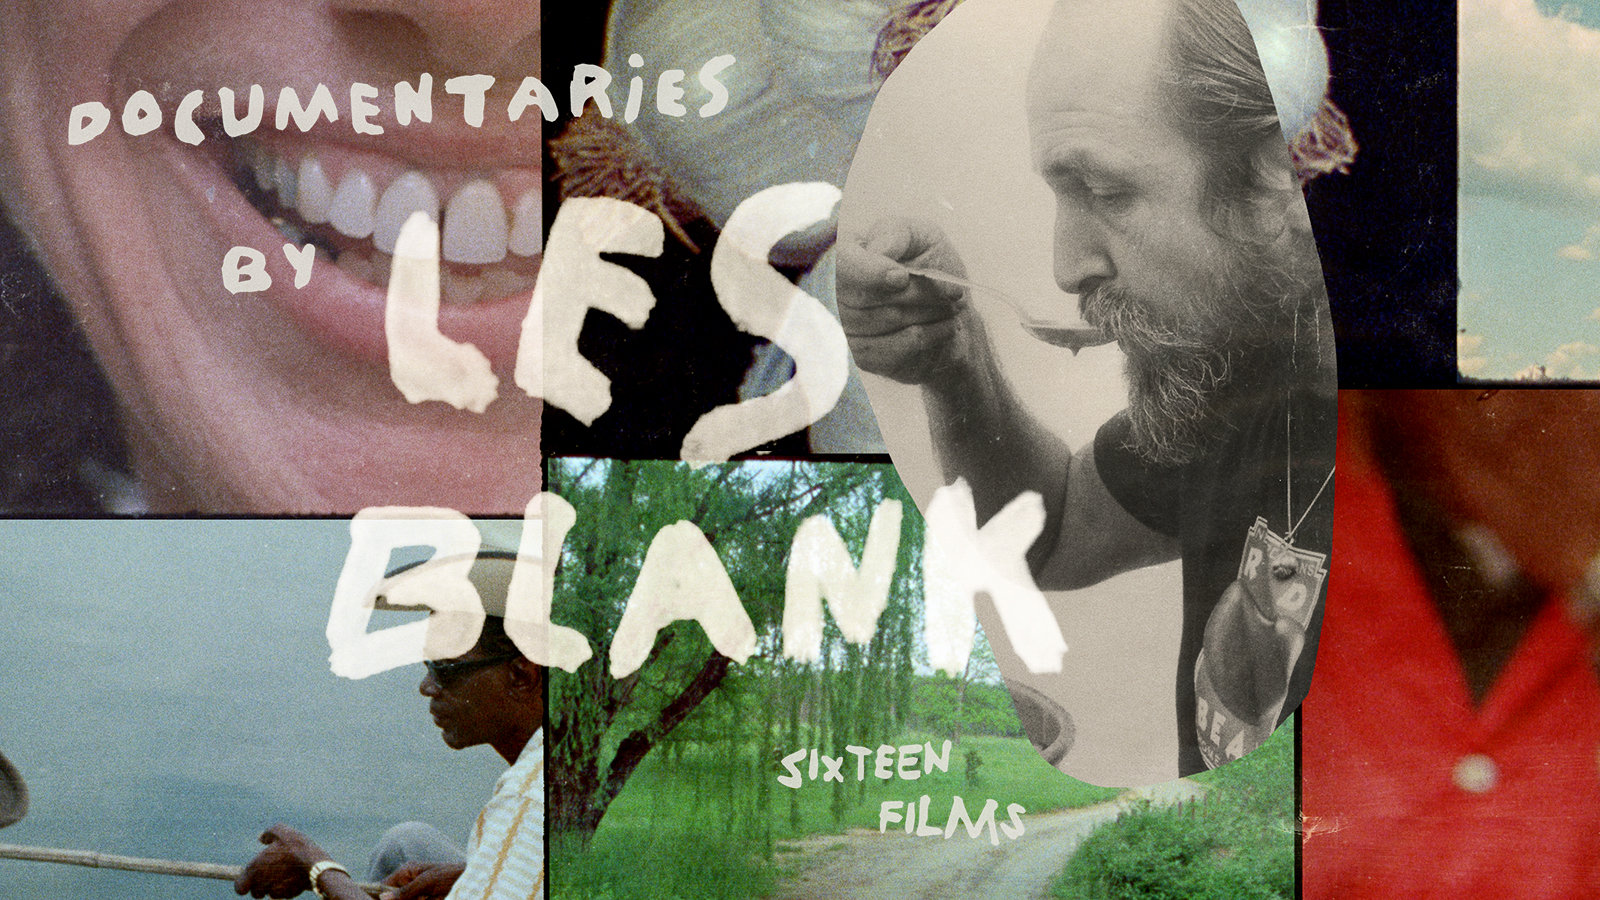 Documentaries by Les Blank - The Criterion Channel